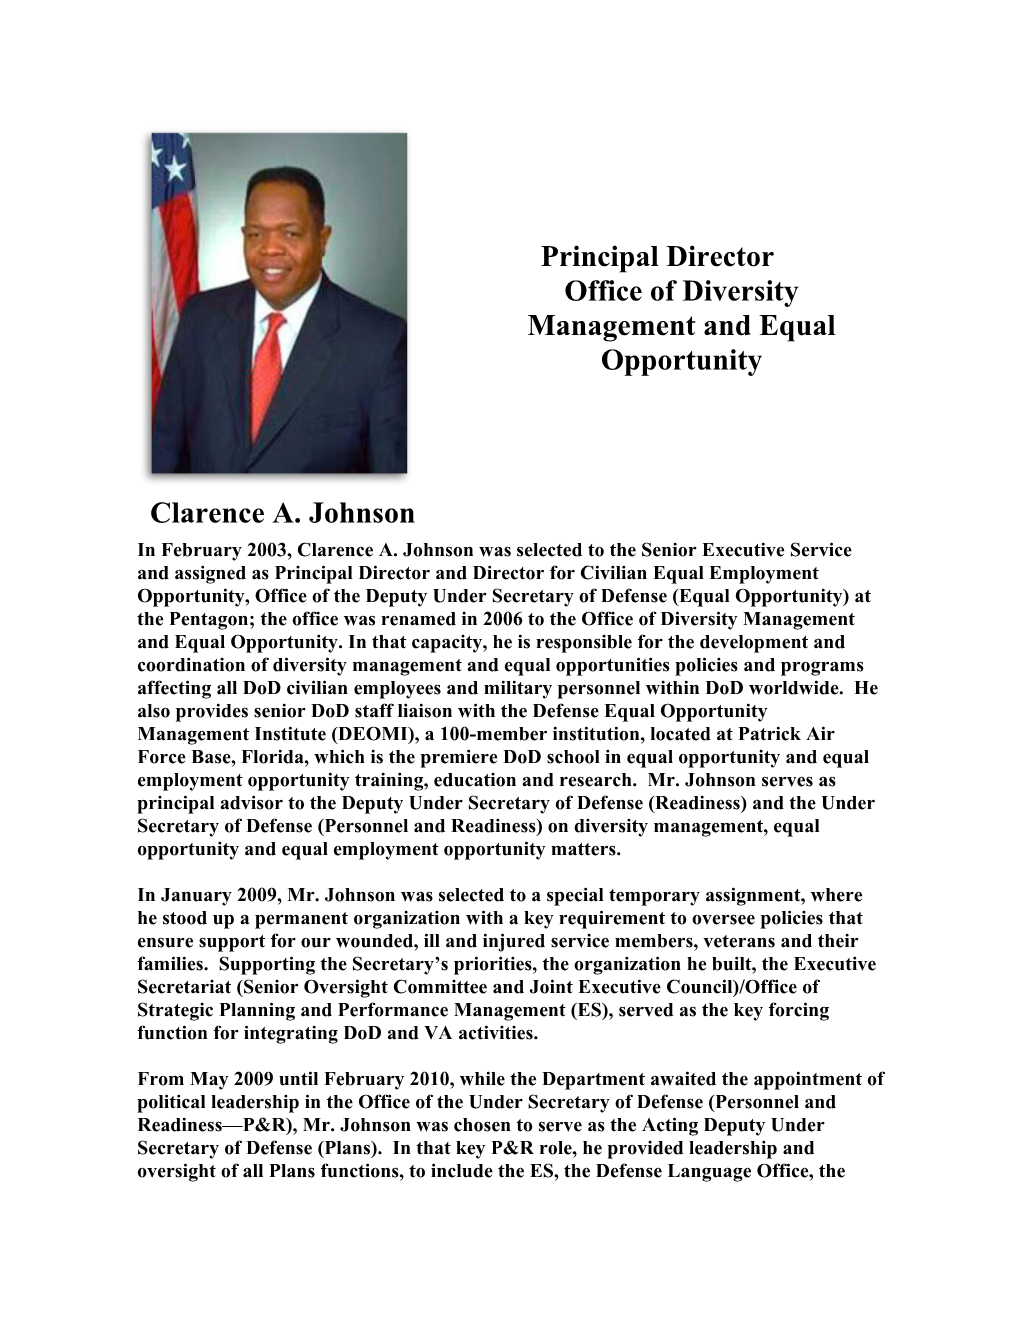 Principal Director Office of Diversity Management and Equal Opportunity